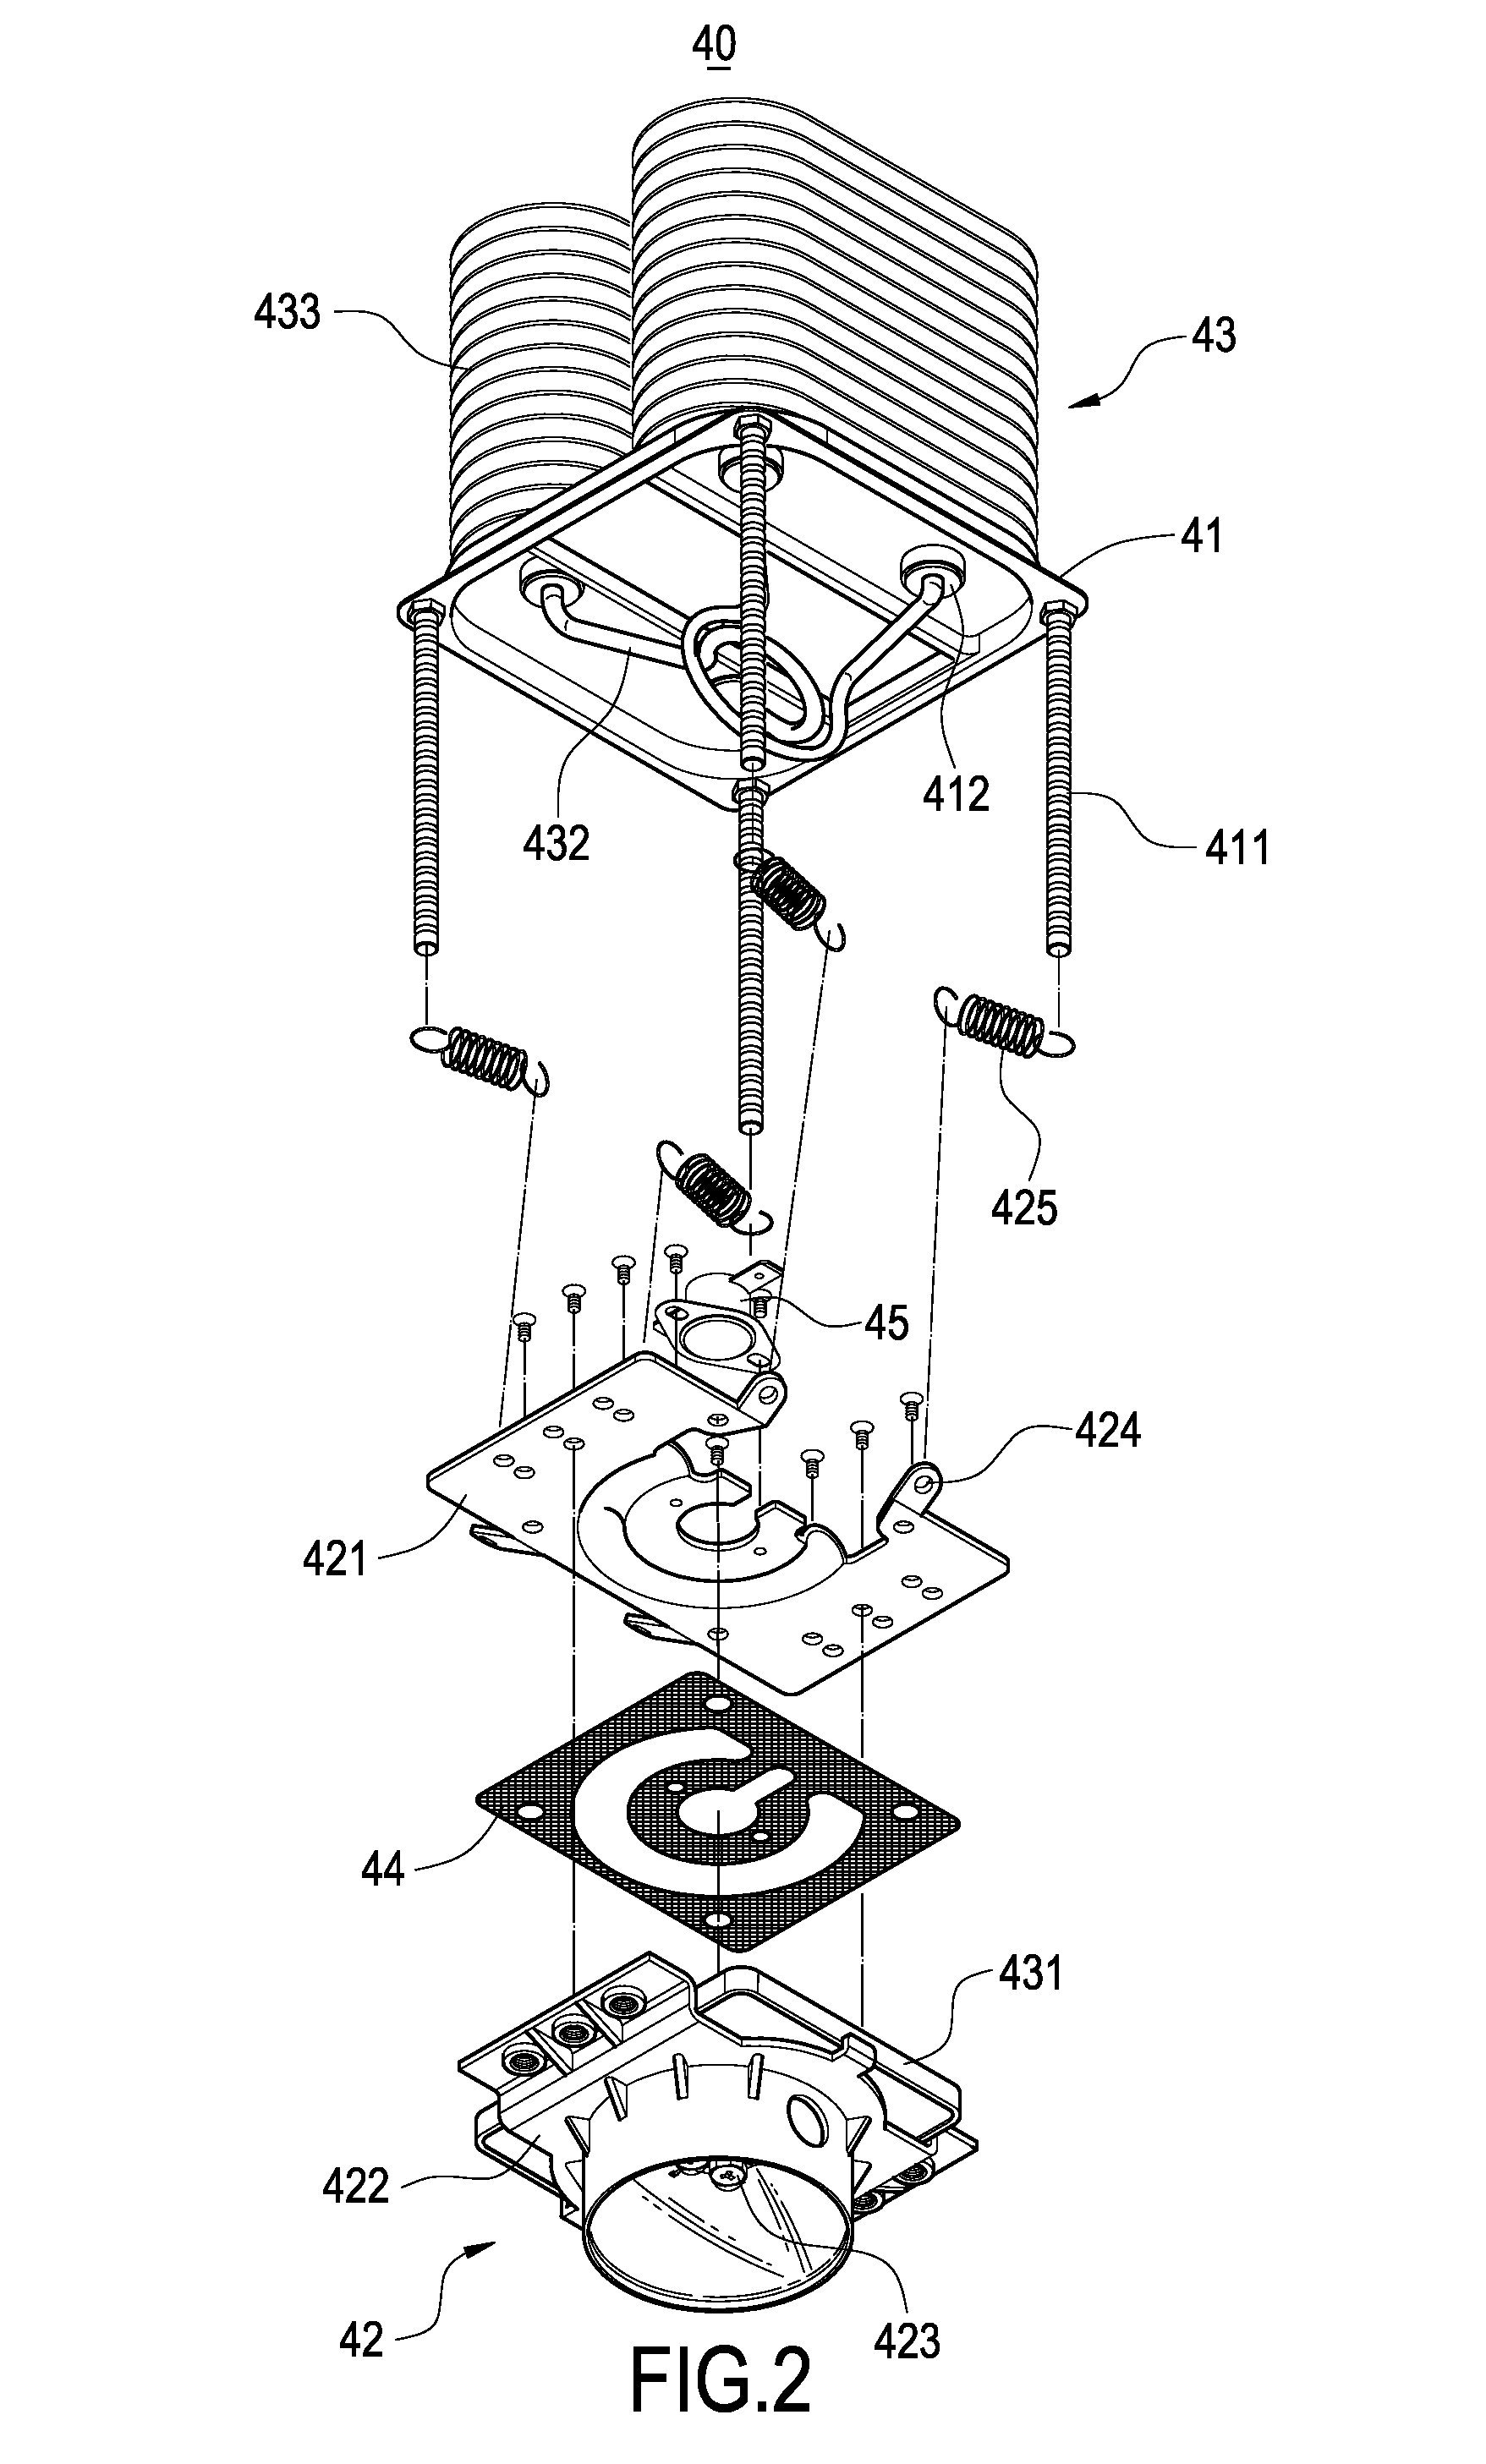 Modulized Assembly Of A Large-sized LED Lamp